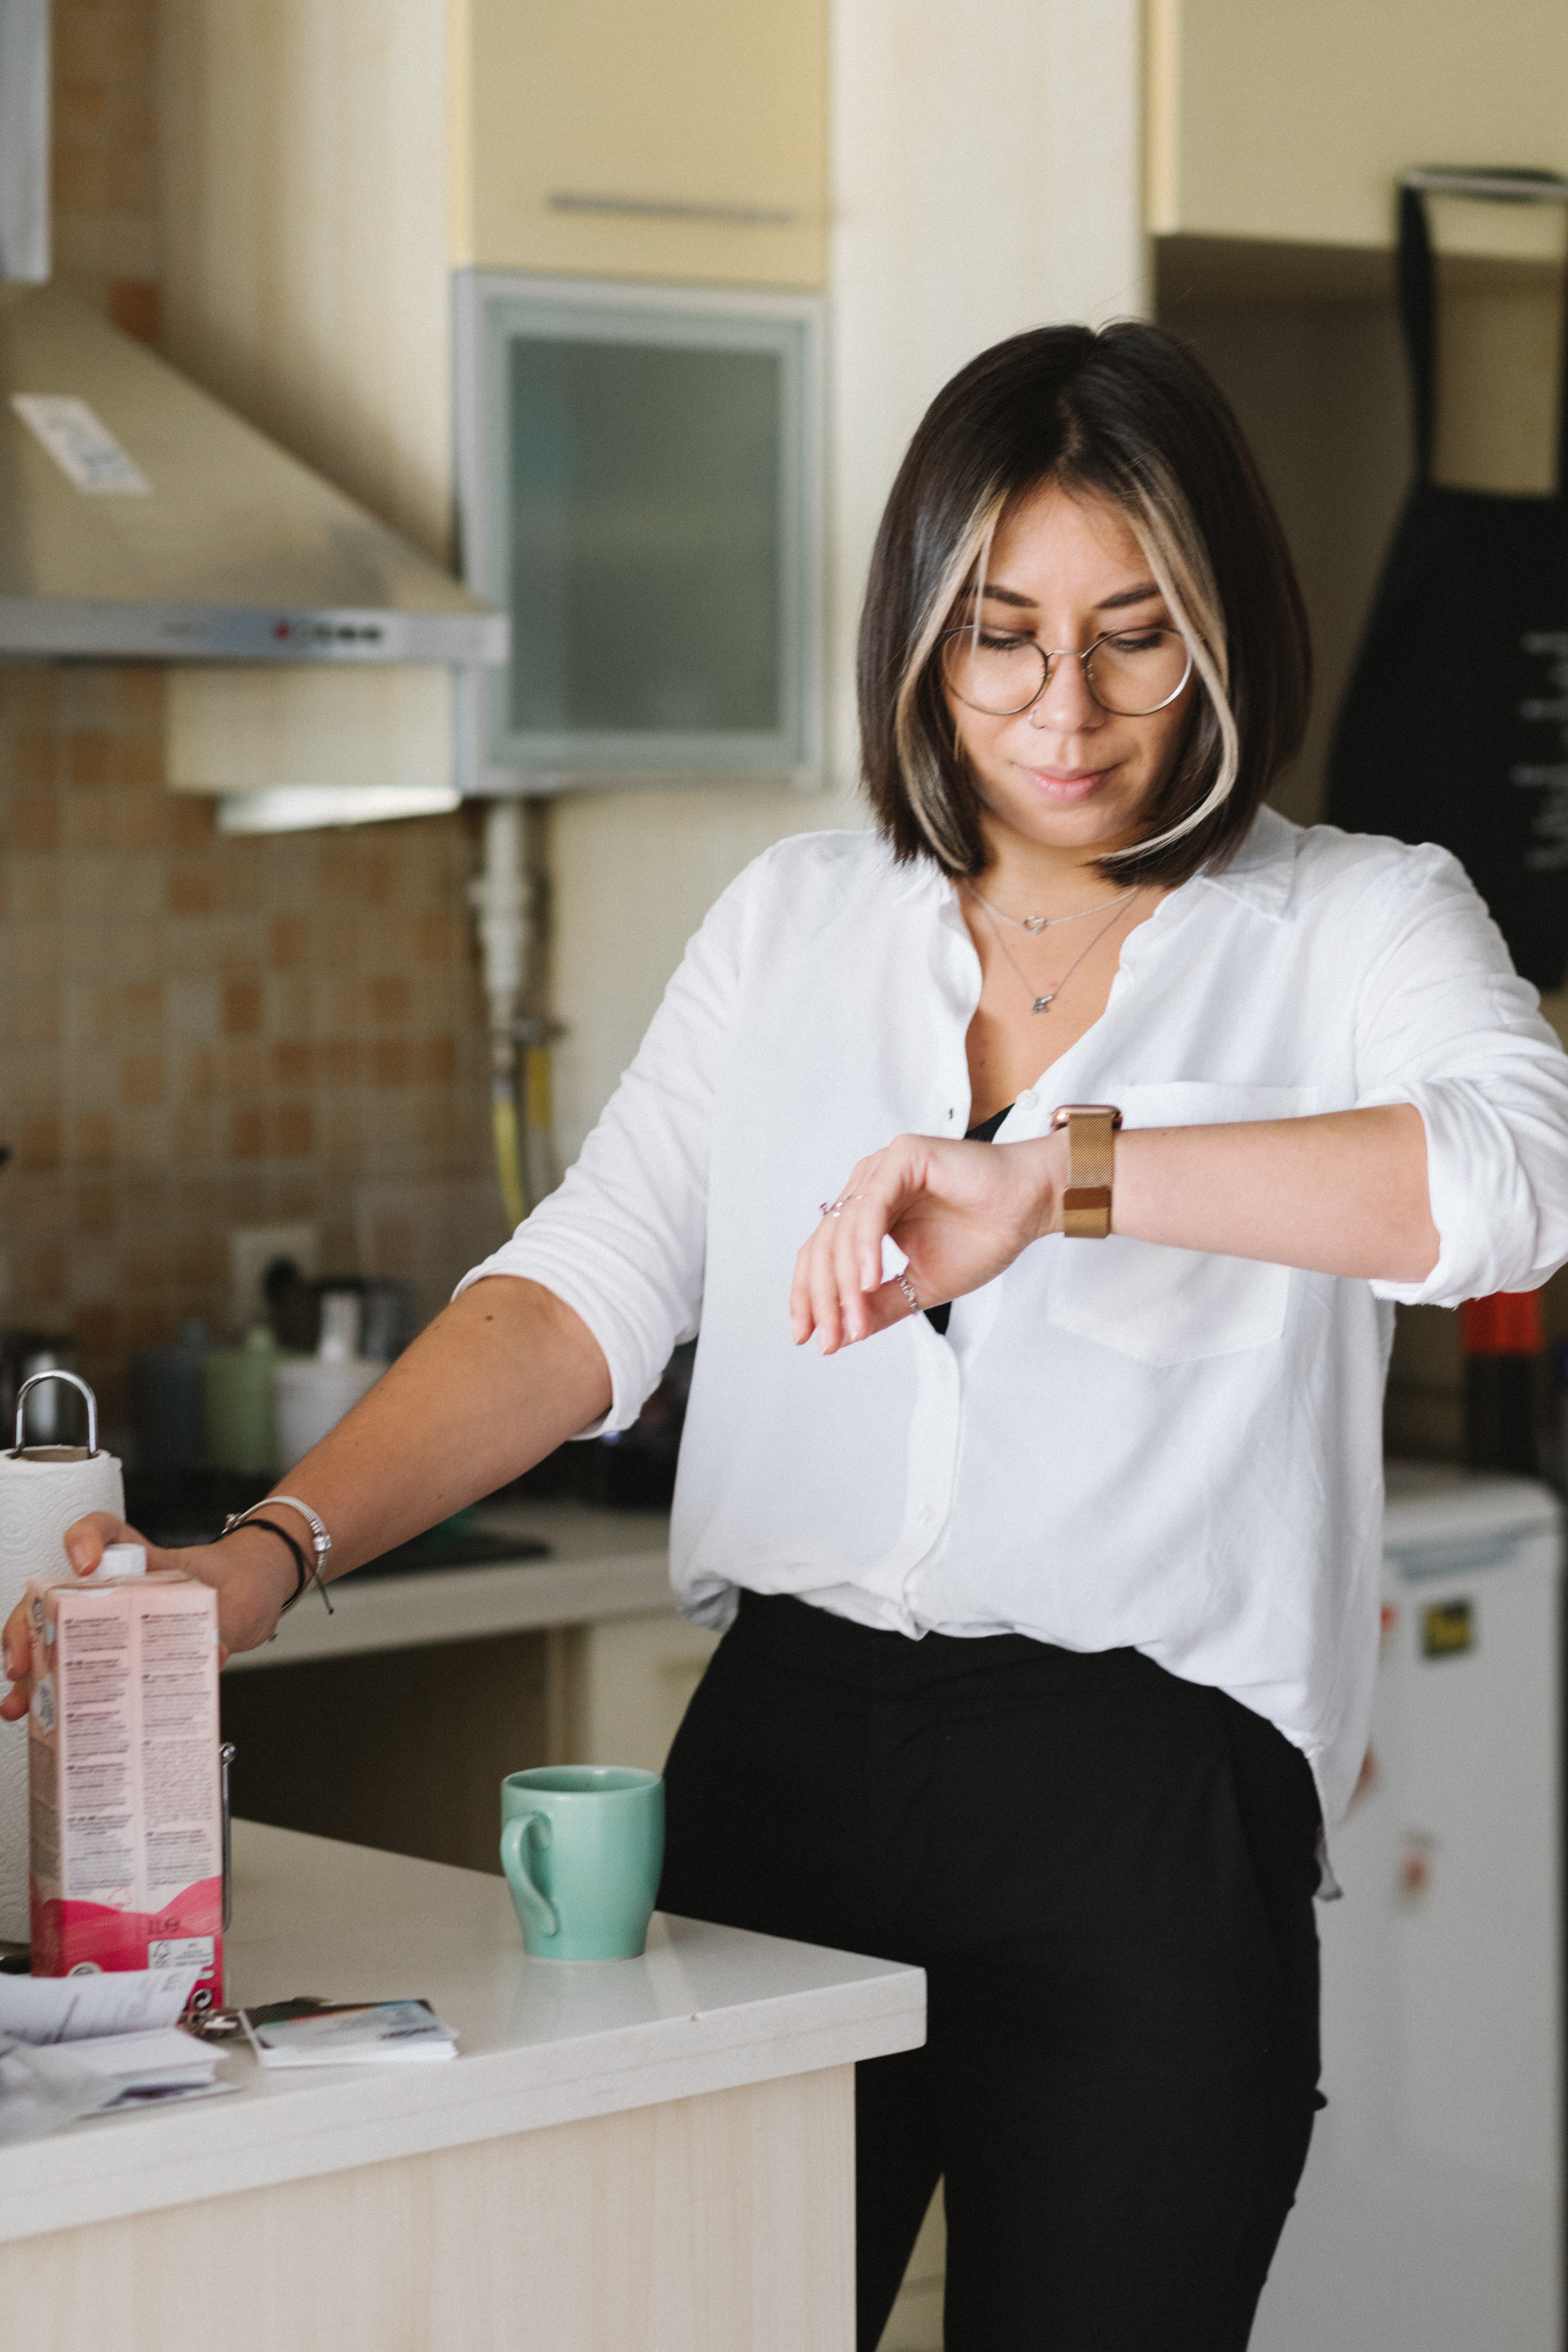 A woman looking at her watch. | Source: Pexels